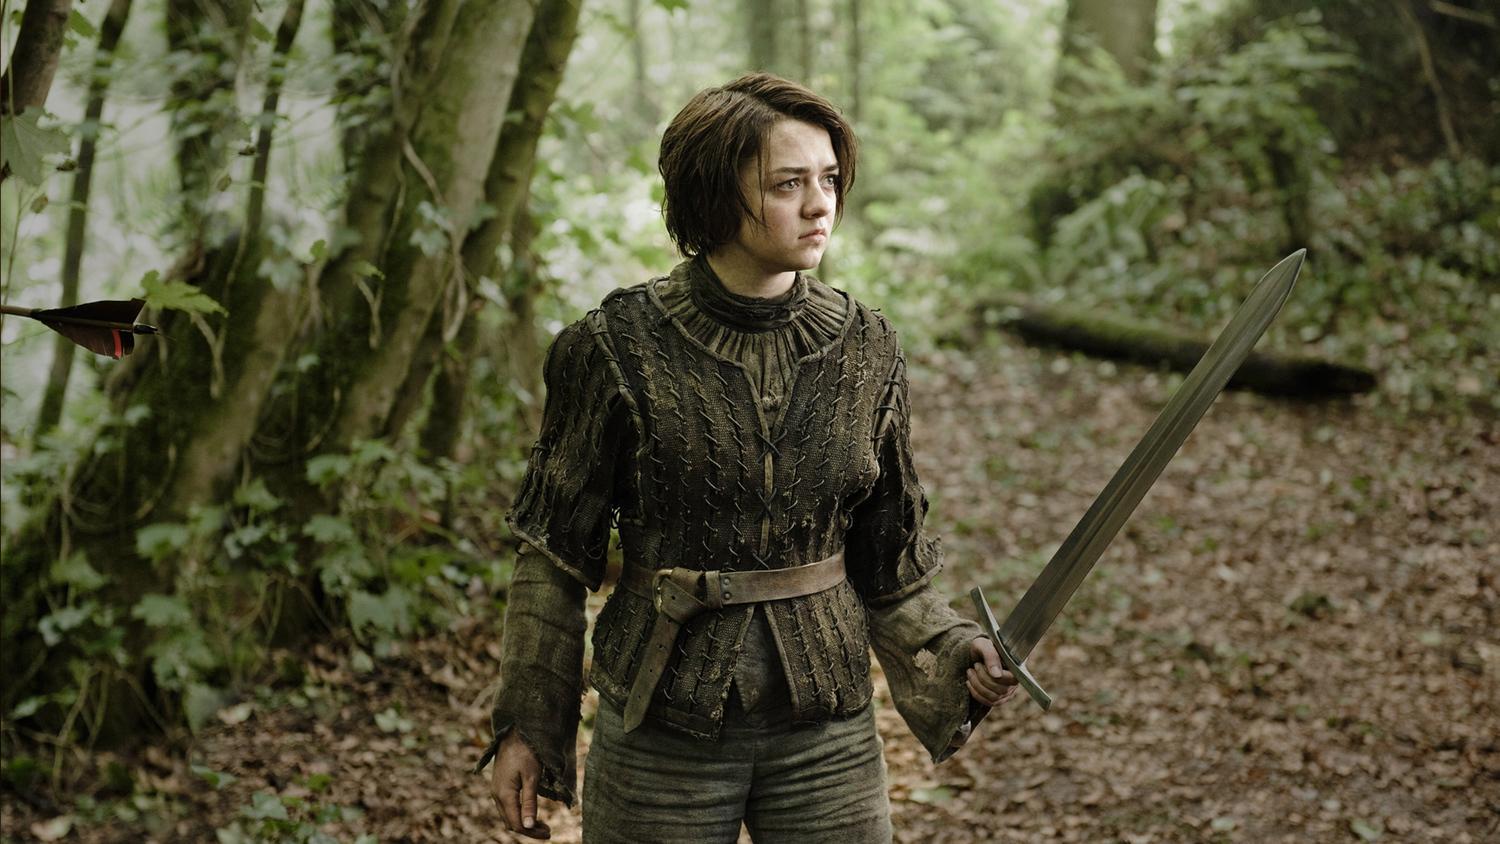 First Look at Arya's Season Five Costume Change | Watchers on the Wall | A  Game of Thrones/House of the Dragon Community for Breaking News, Casting,  and Commentary